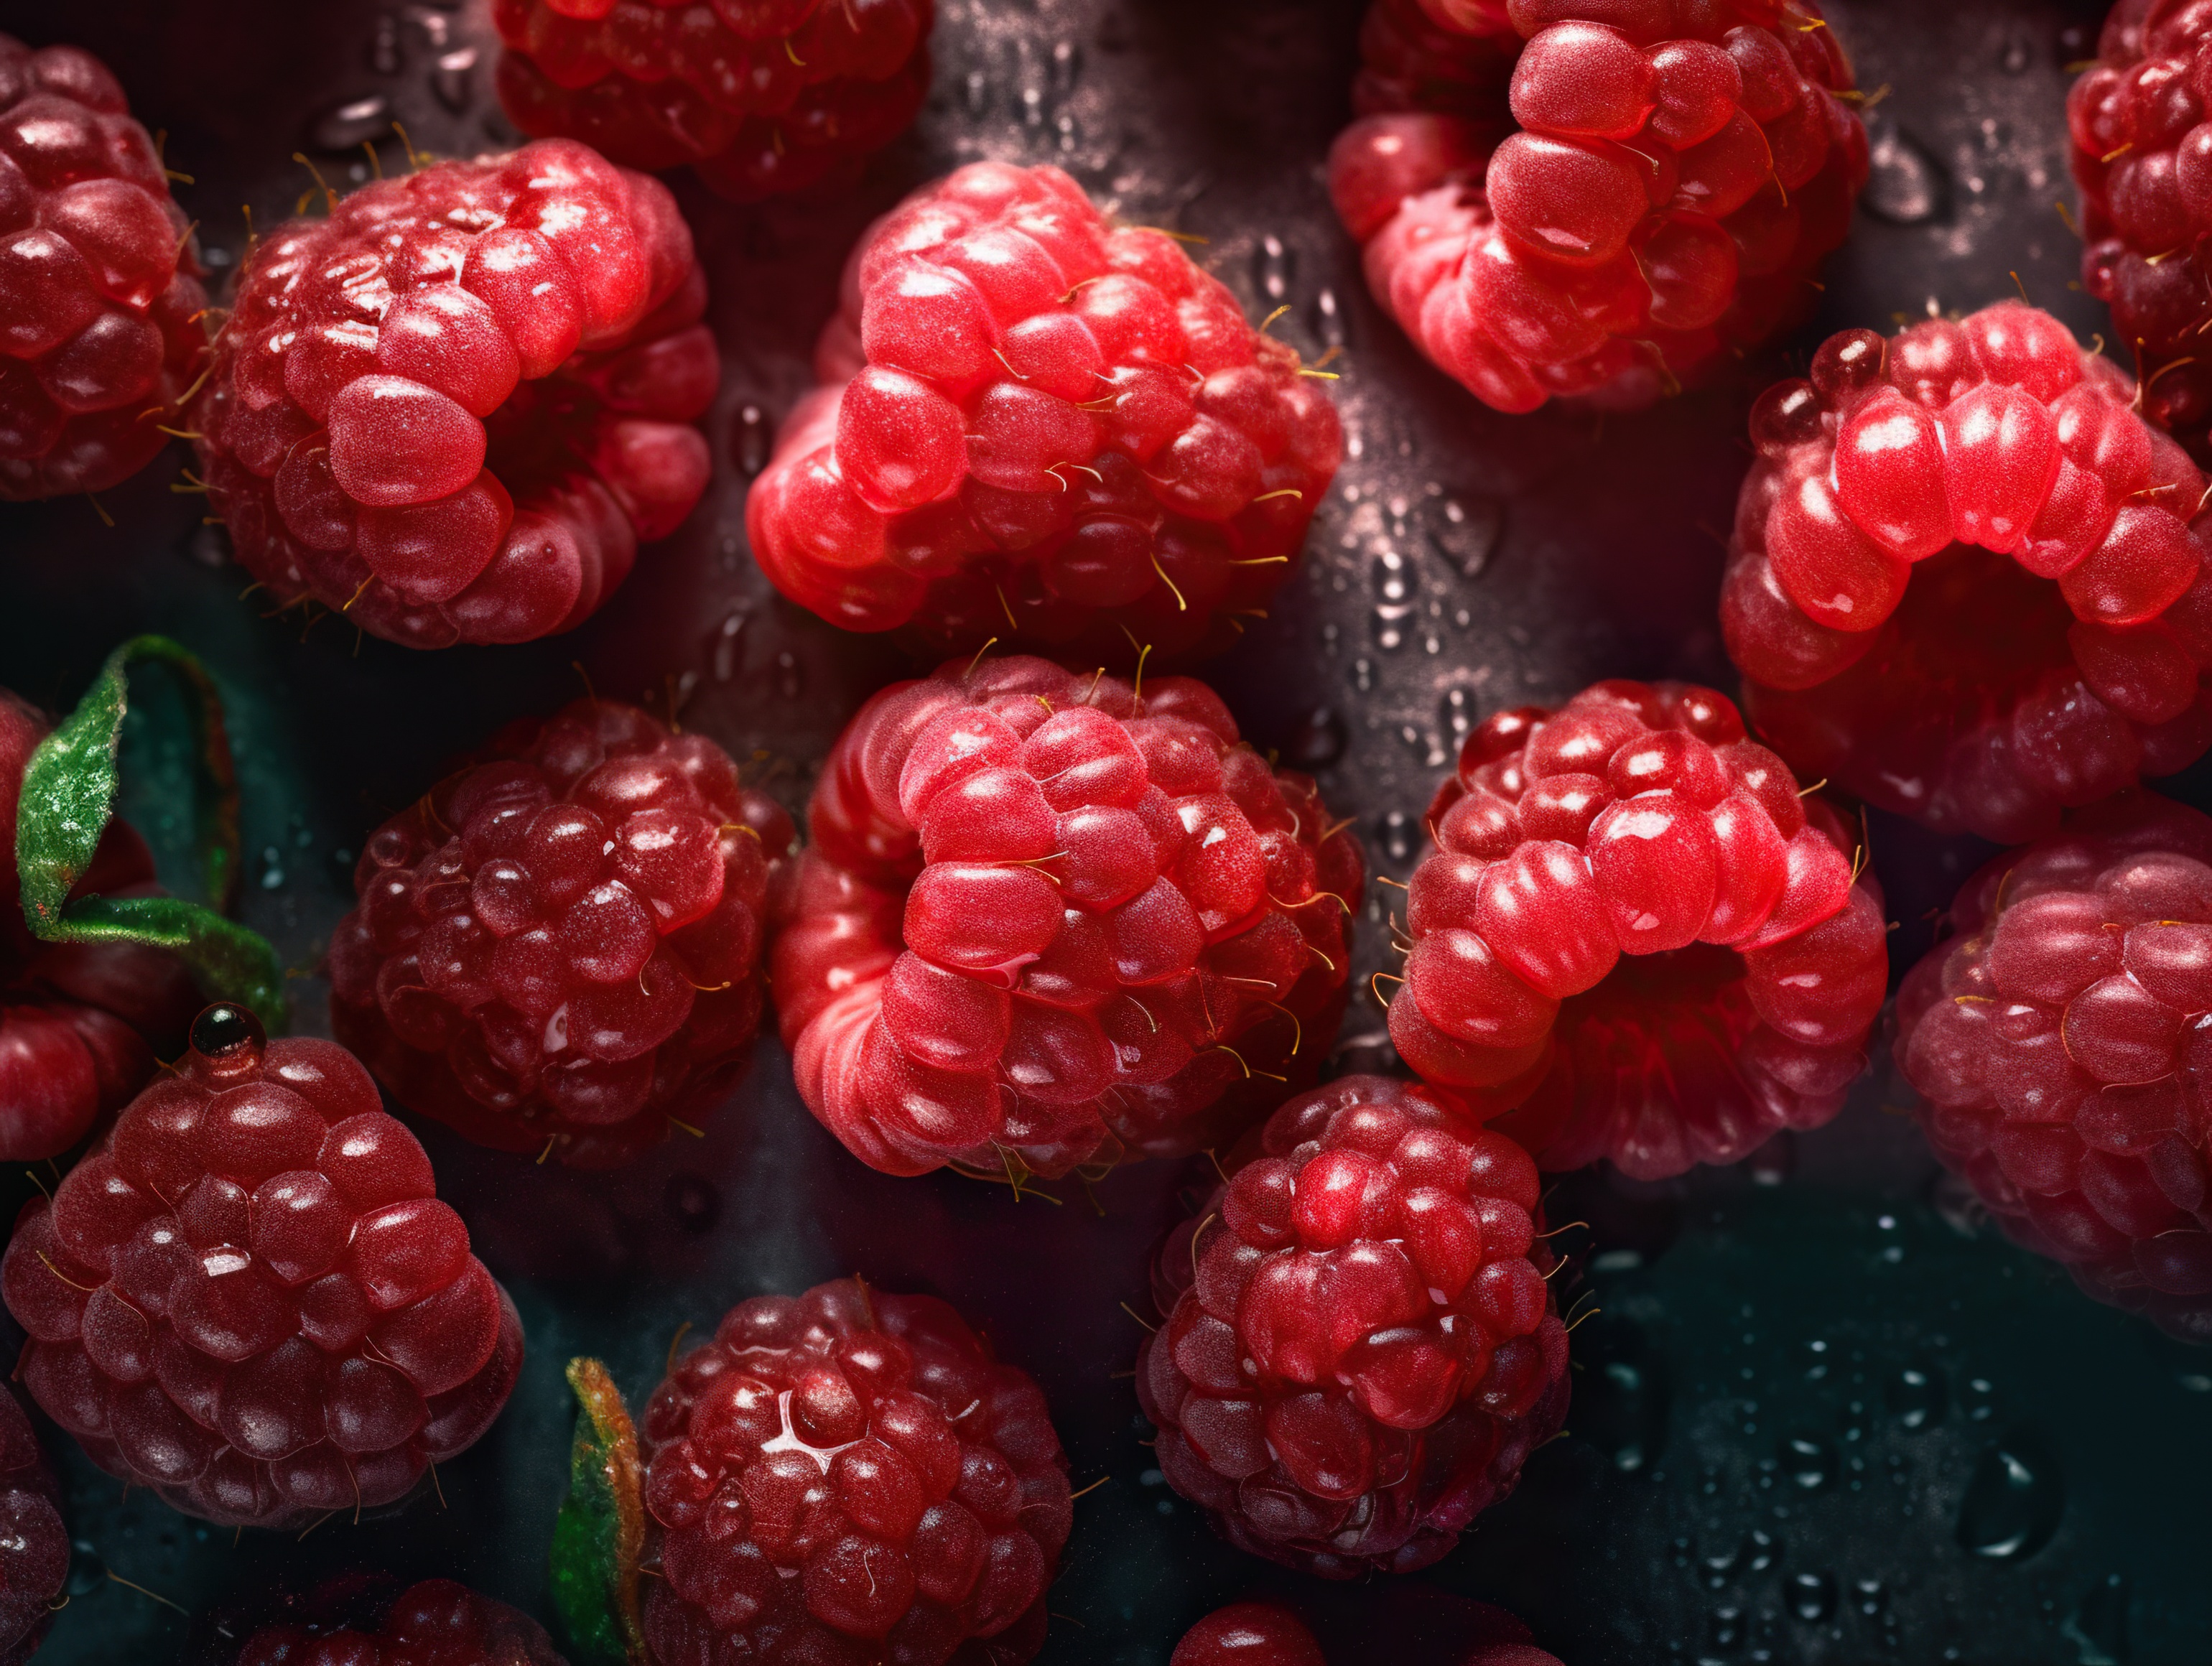 Fresh Raspberries with Water Droplets on Dark Background